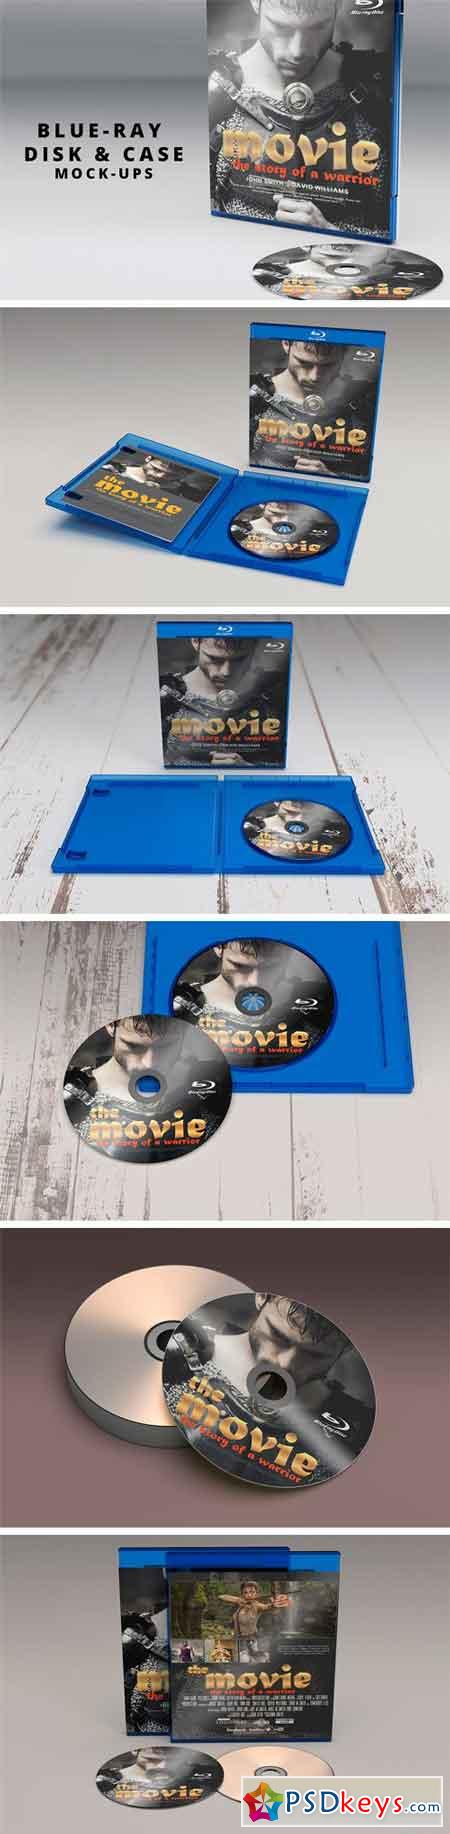 Blue Ray Disk & Cover Mockup 1659058